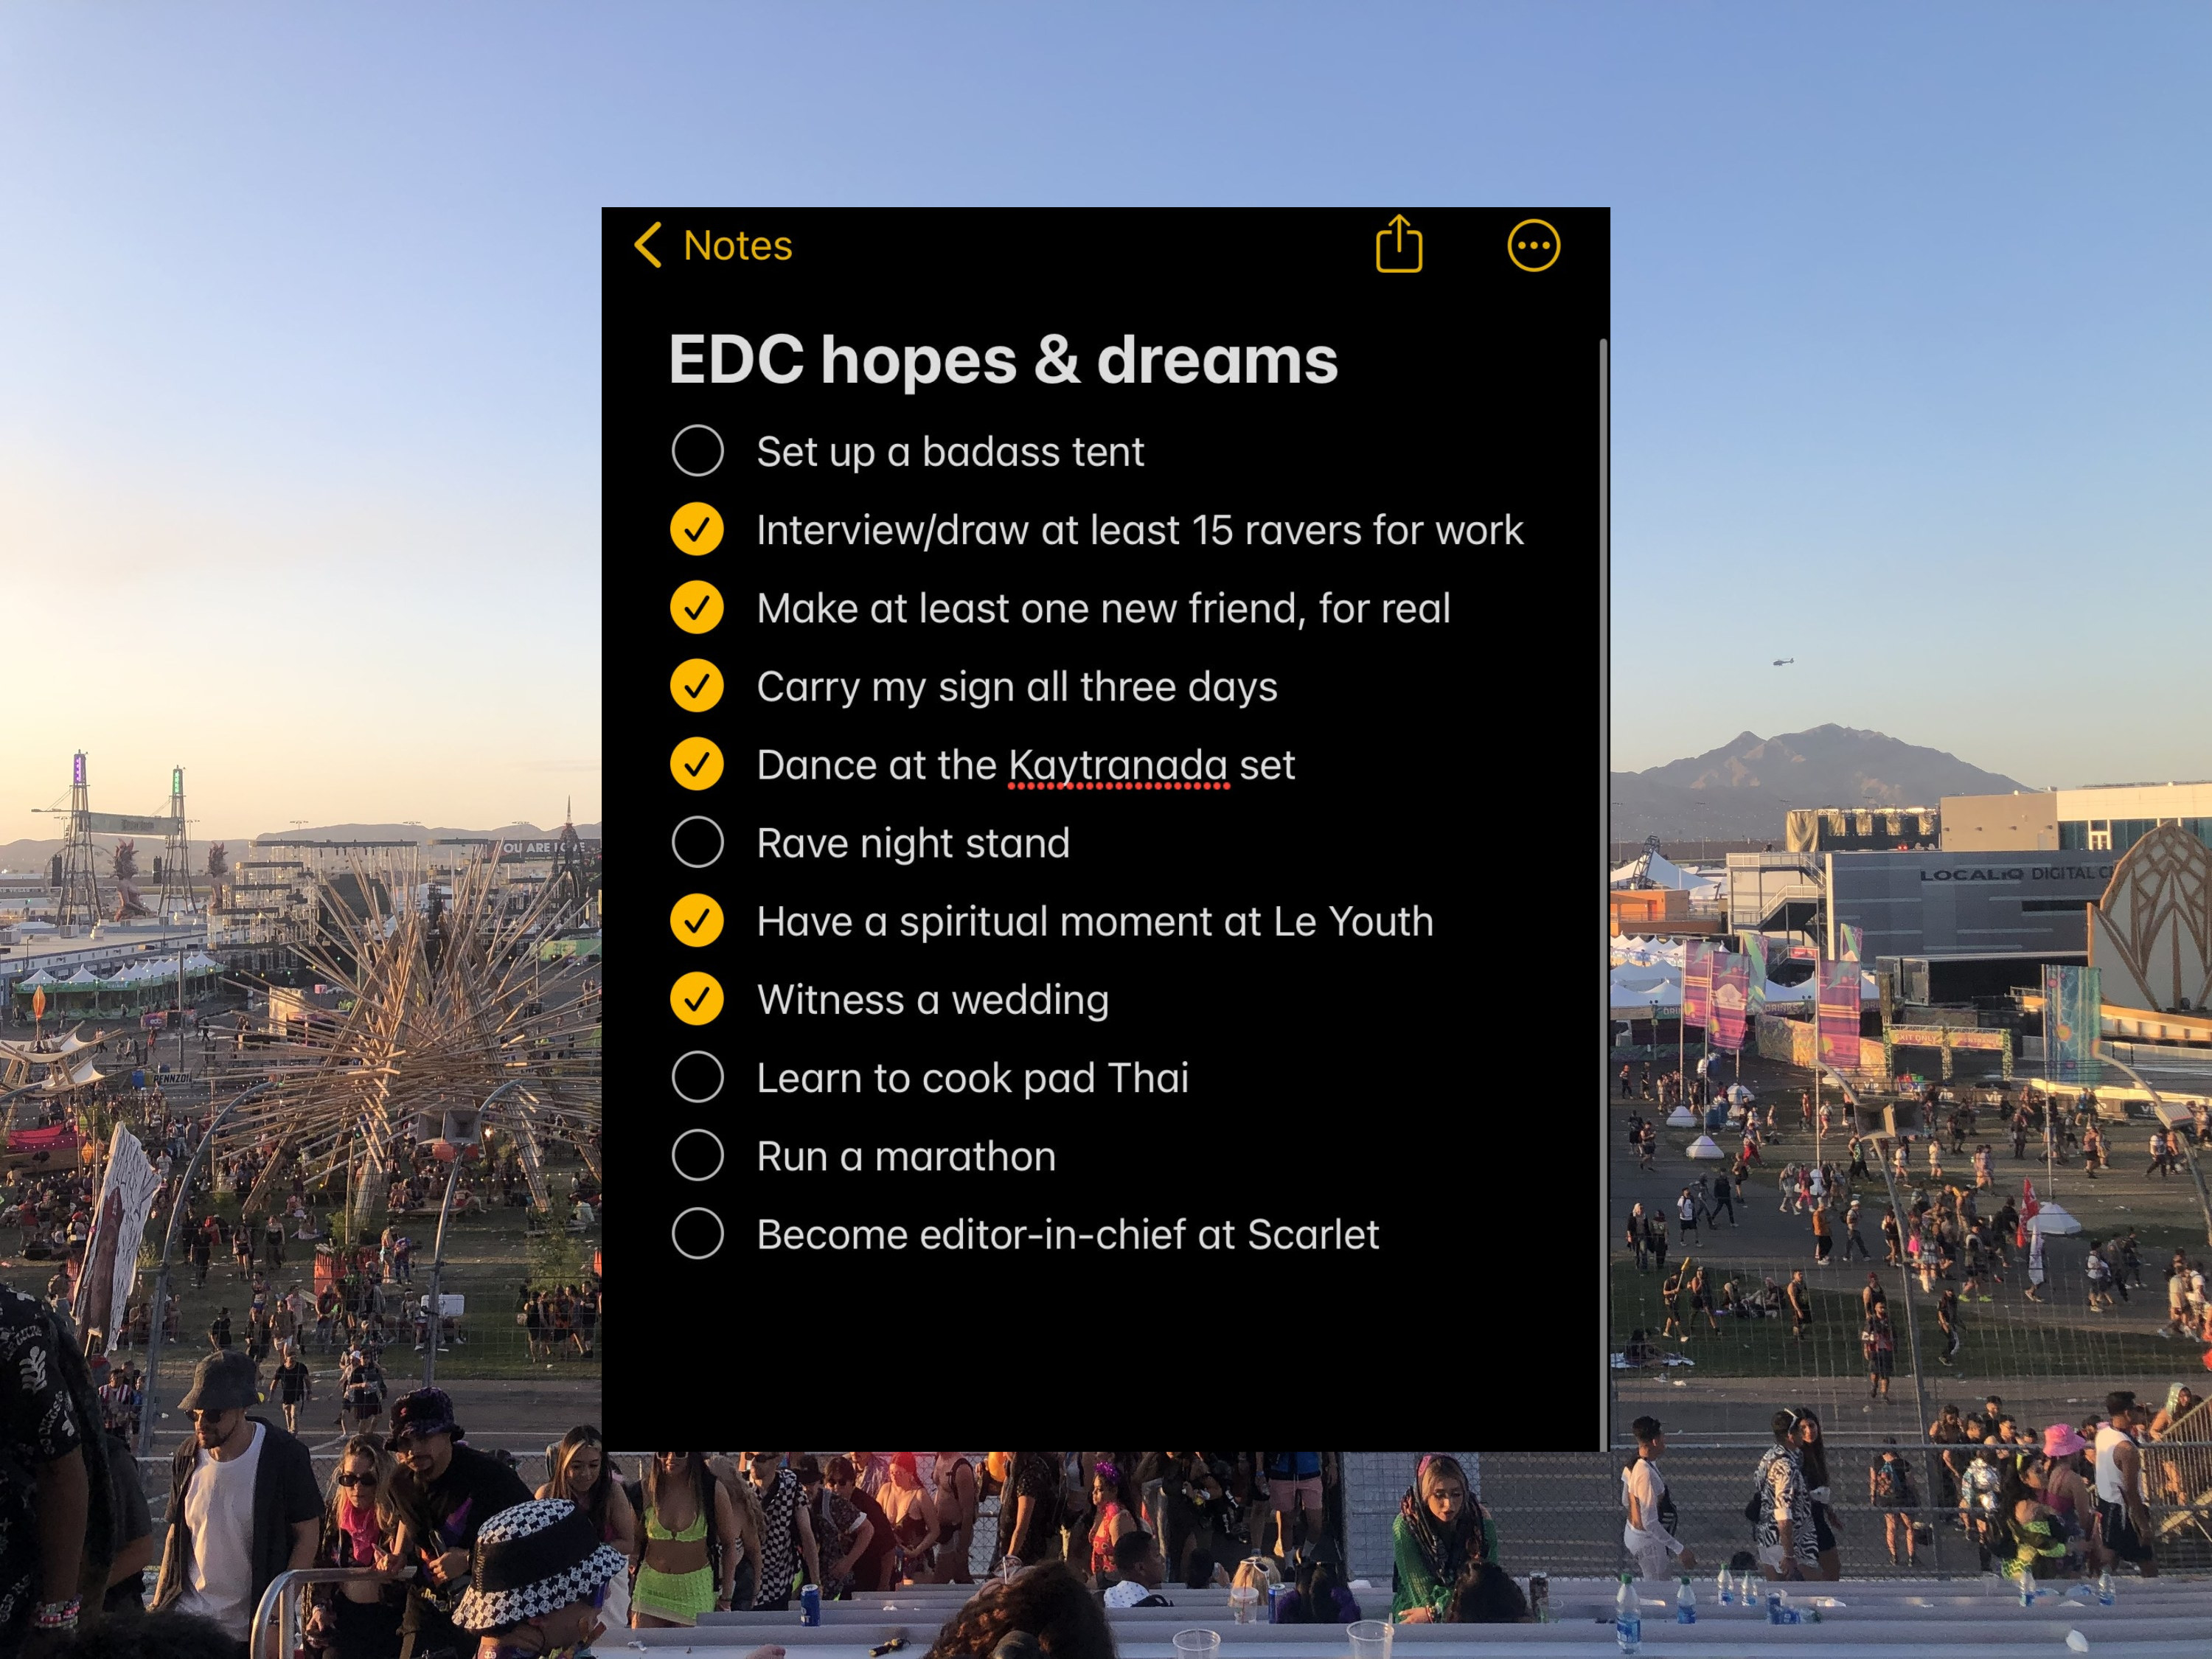 edc in the back with an insert of the author&#x27;s hopes and dreams for his edc 2023 experience